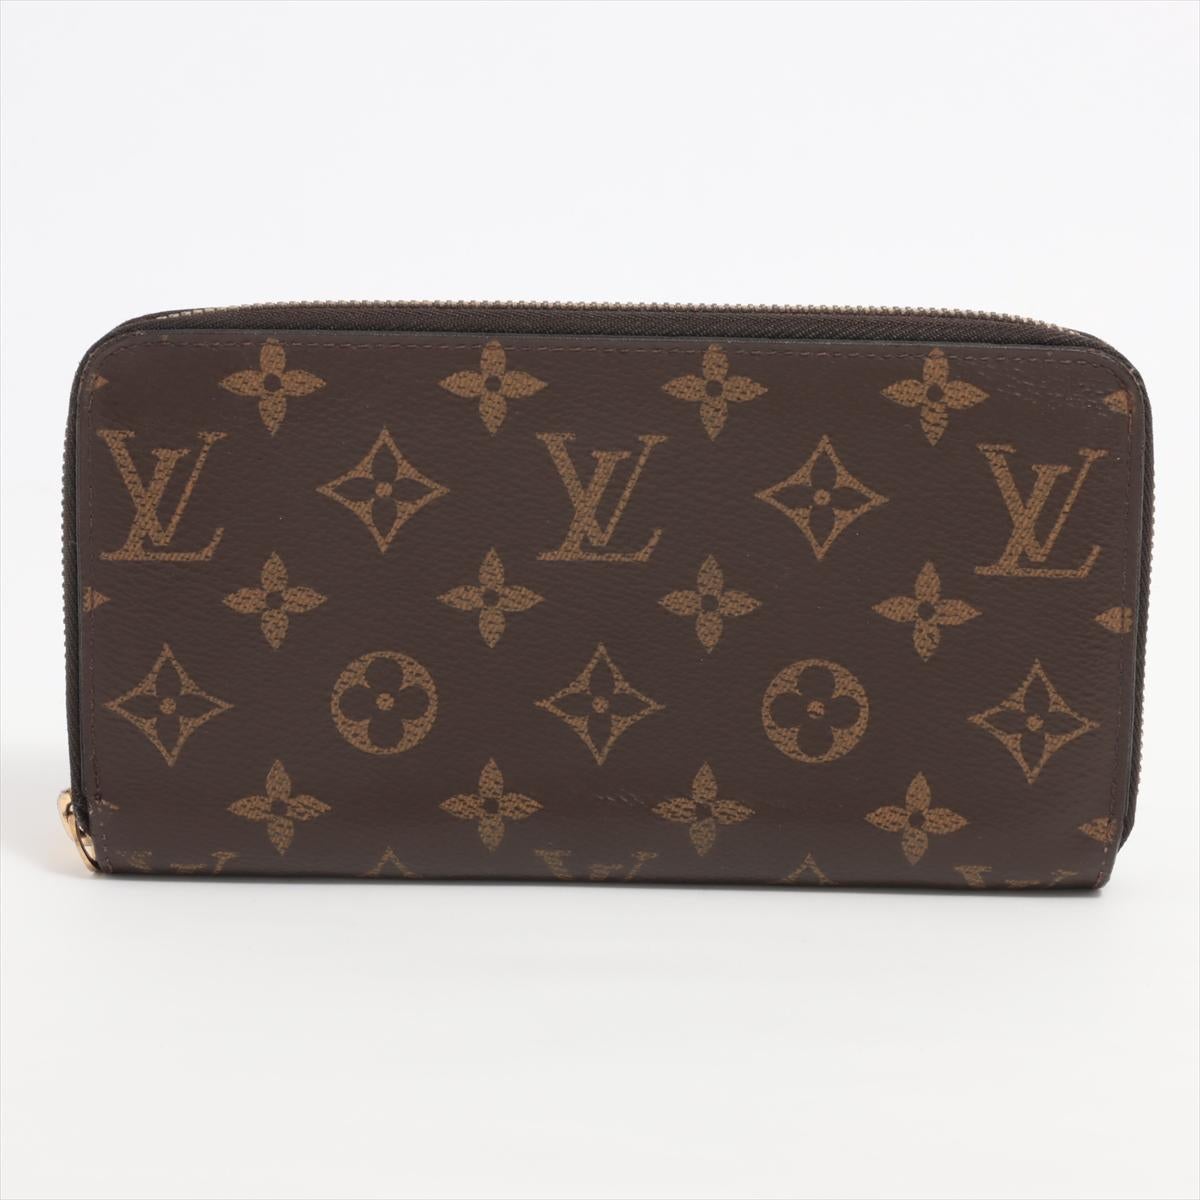 The Louis Vuitton Monogram Zippy Wallet in Coquelicot is a vibrant and sophisticated accessory that seamlessly blends the iconic Monogram canvas with a bold red hue. The wallet showcases the instantly recognizable LV monogram pattern, a symbol of